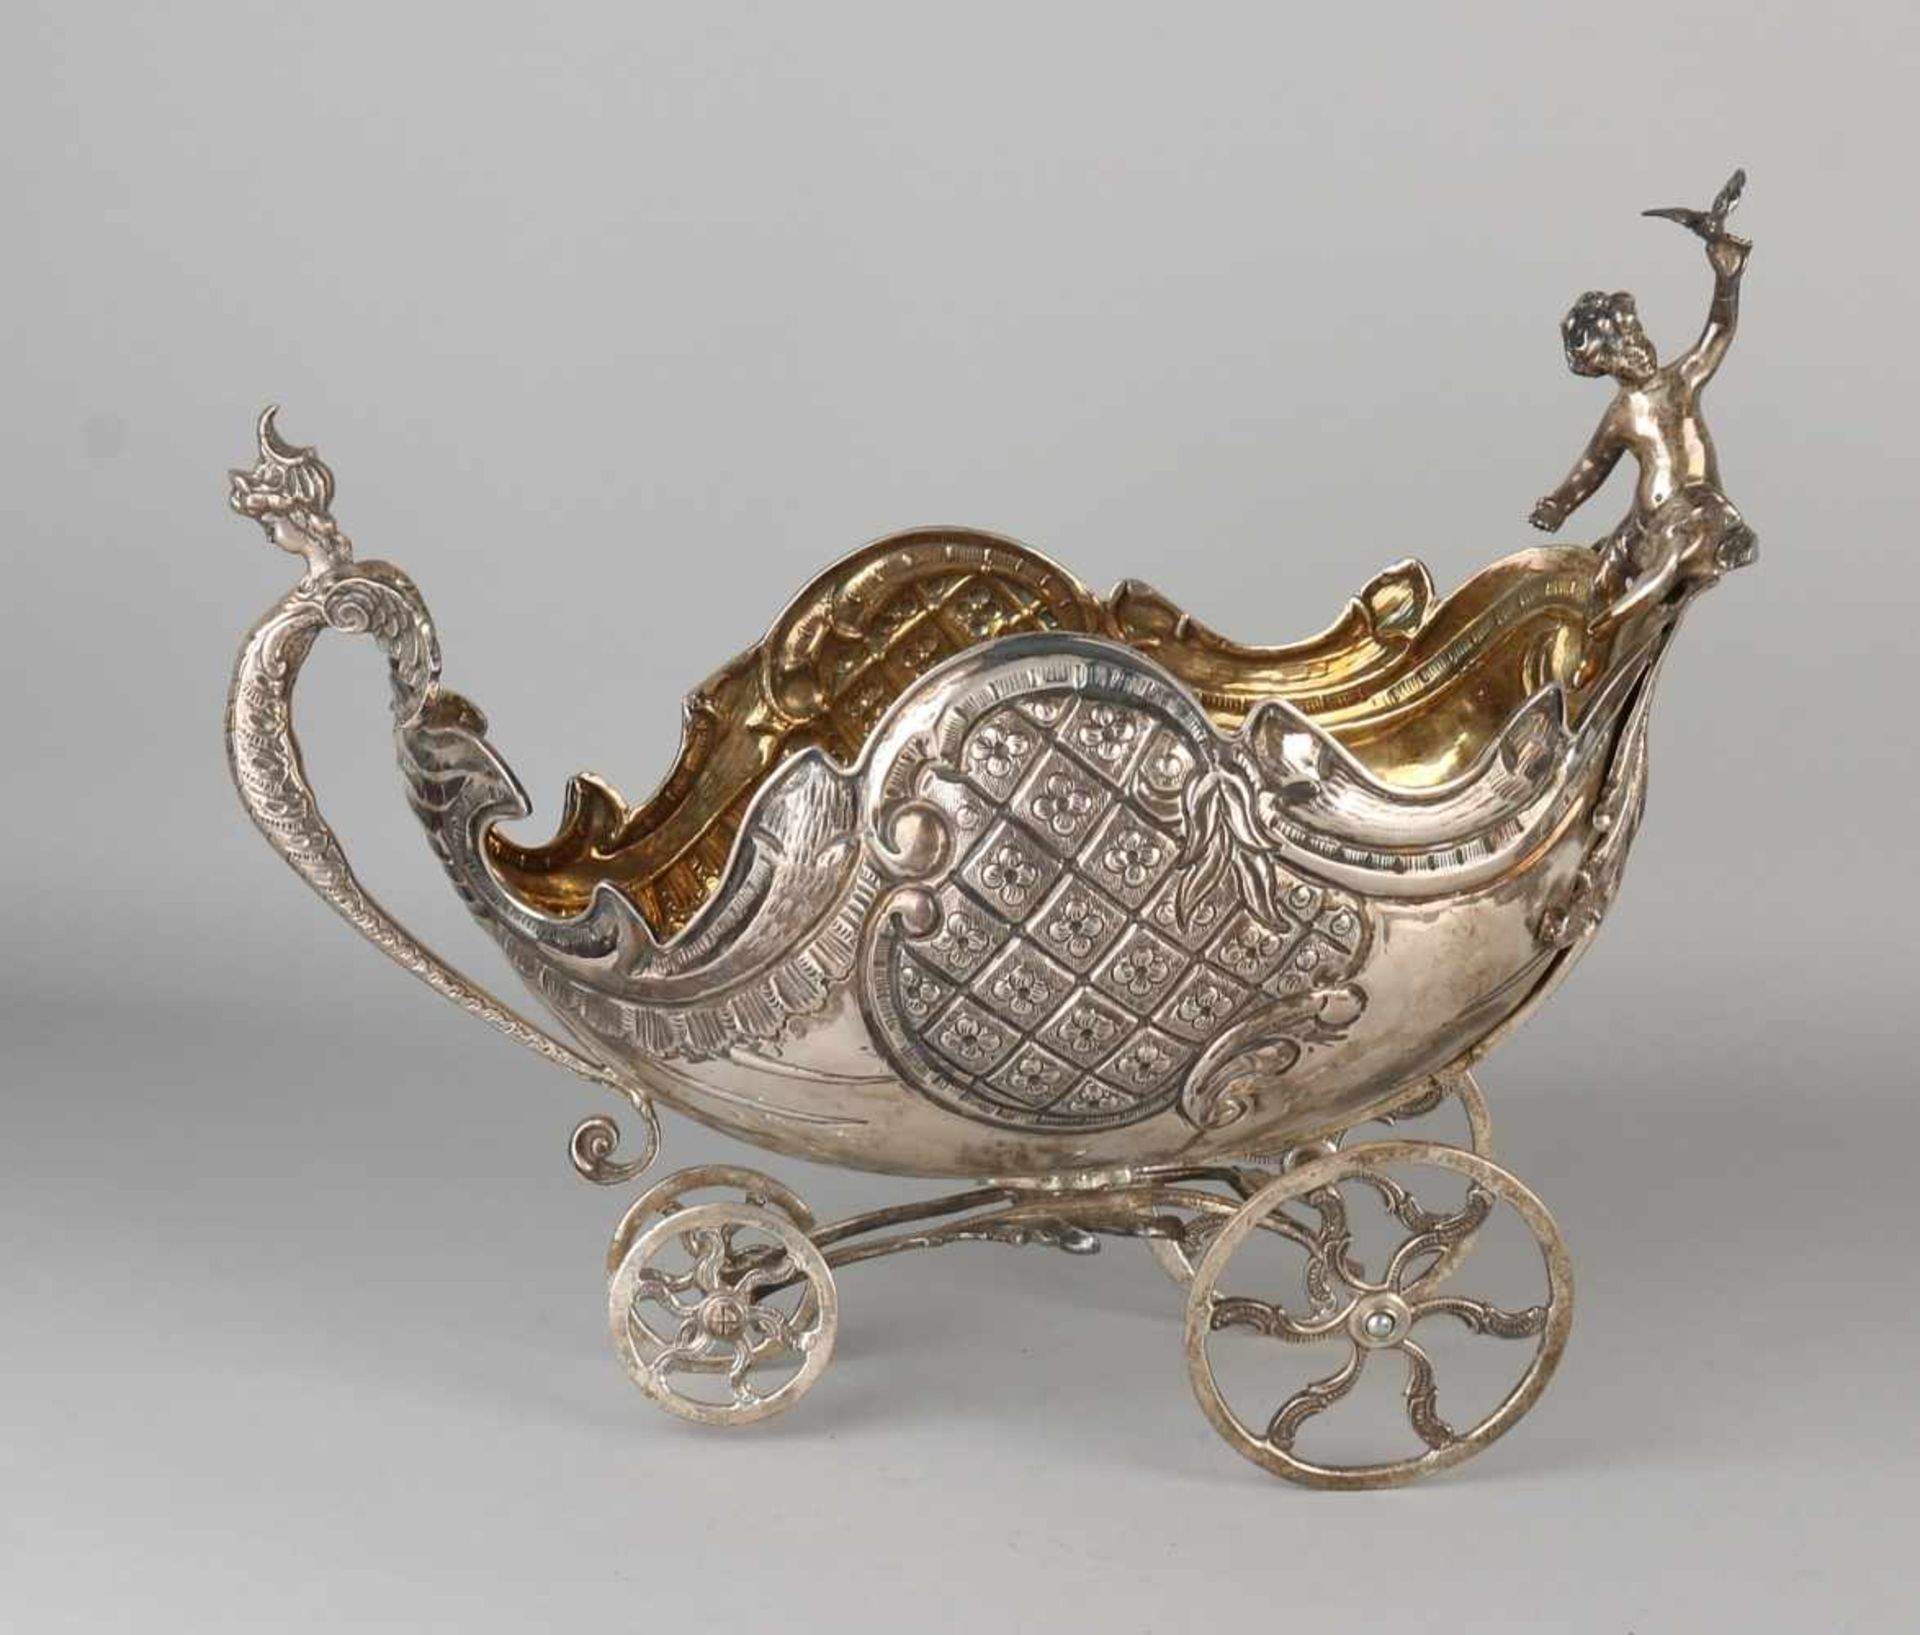 Beautiful silver victory-carriage, 800/000, lavishly decorated with acanthus leaves, palmettes and - Bild 2 aus 3